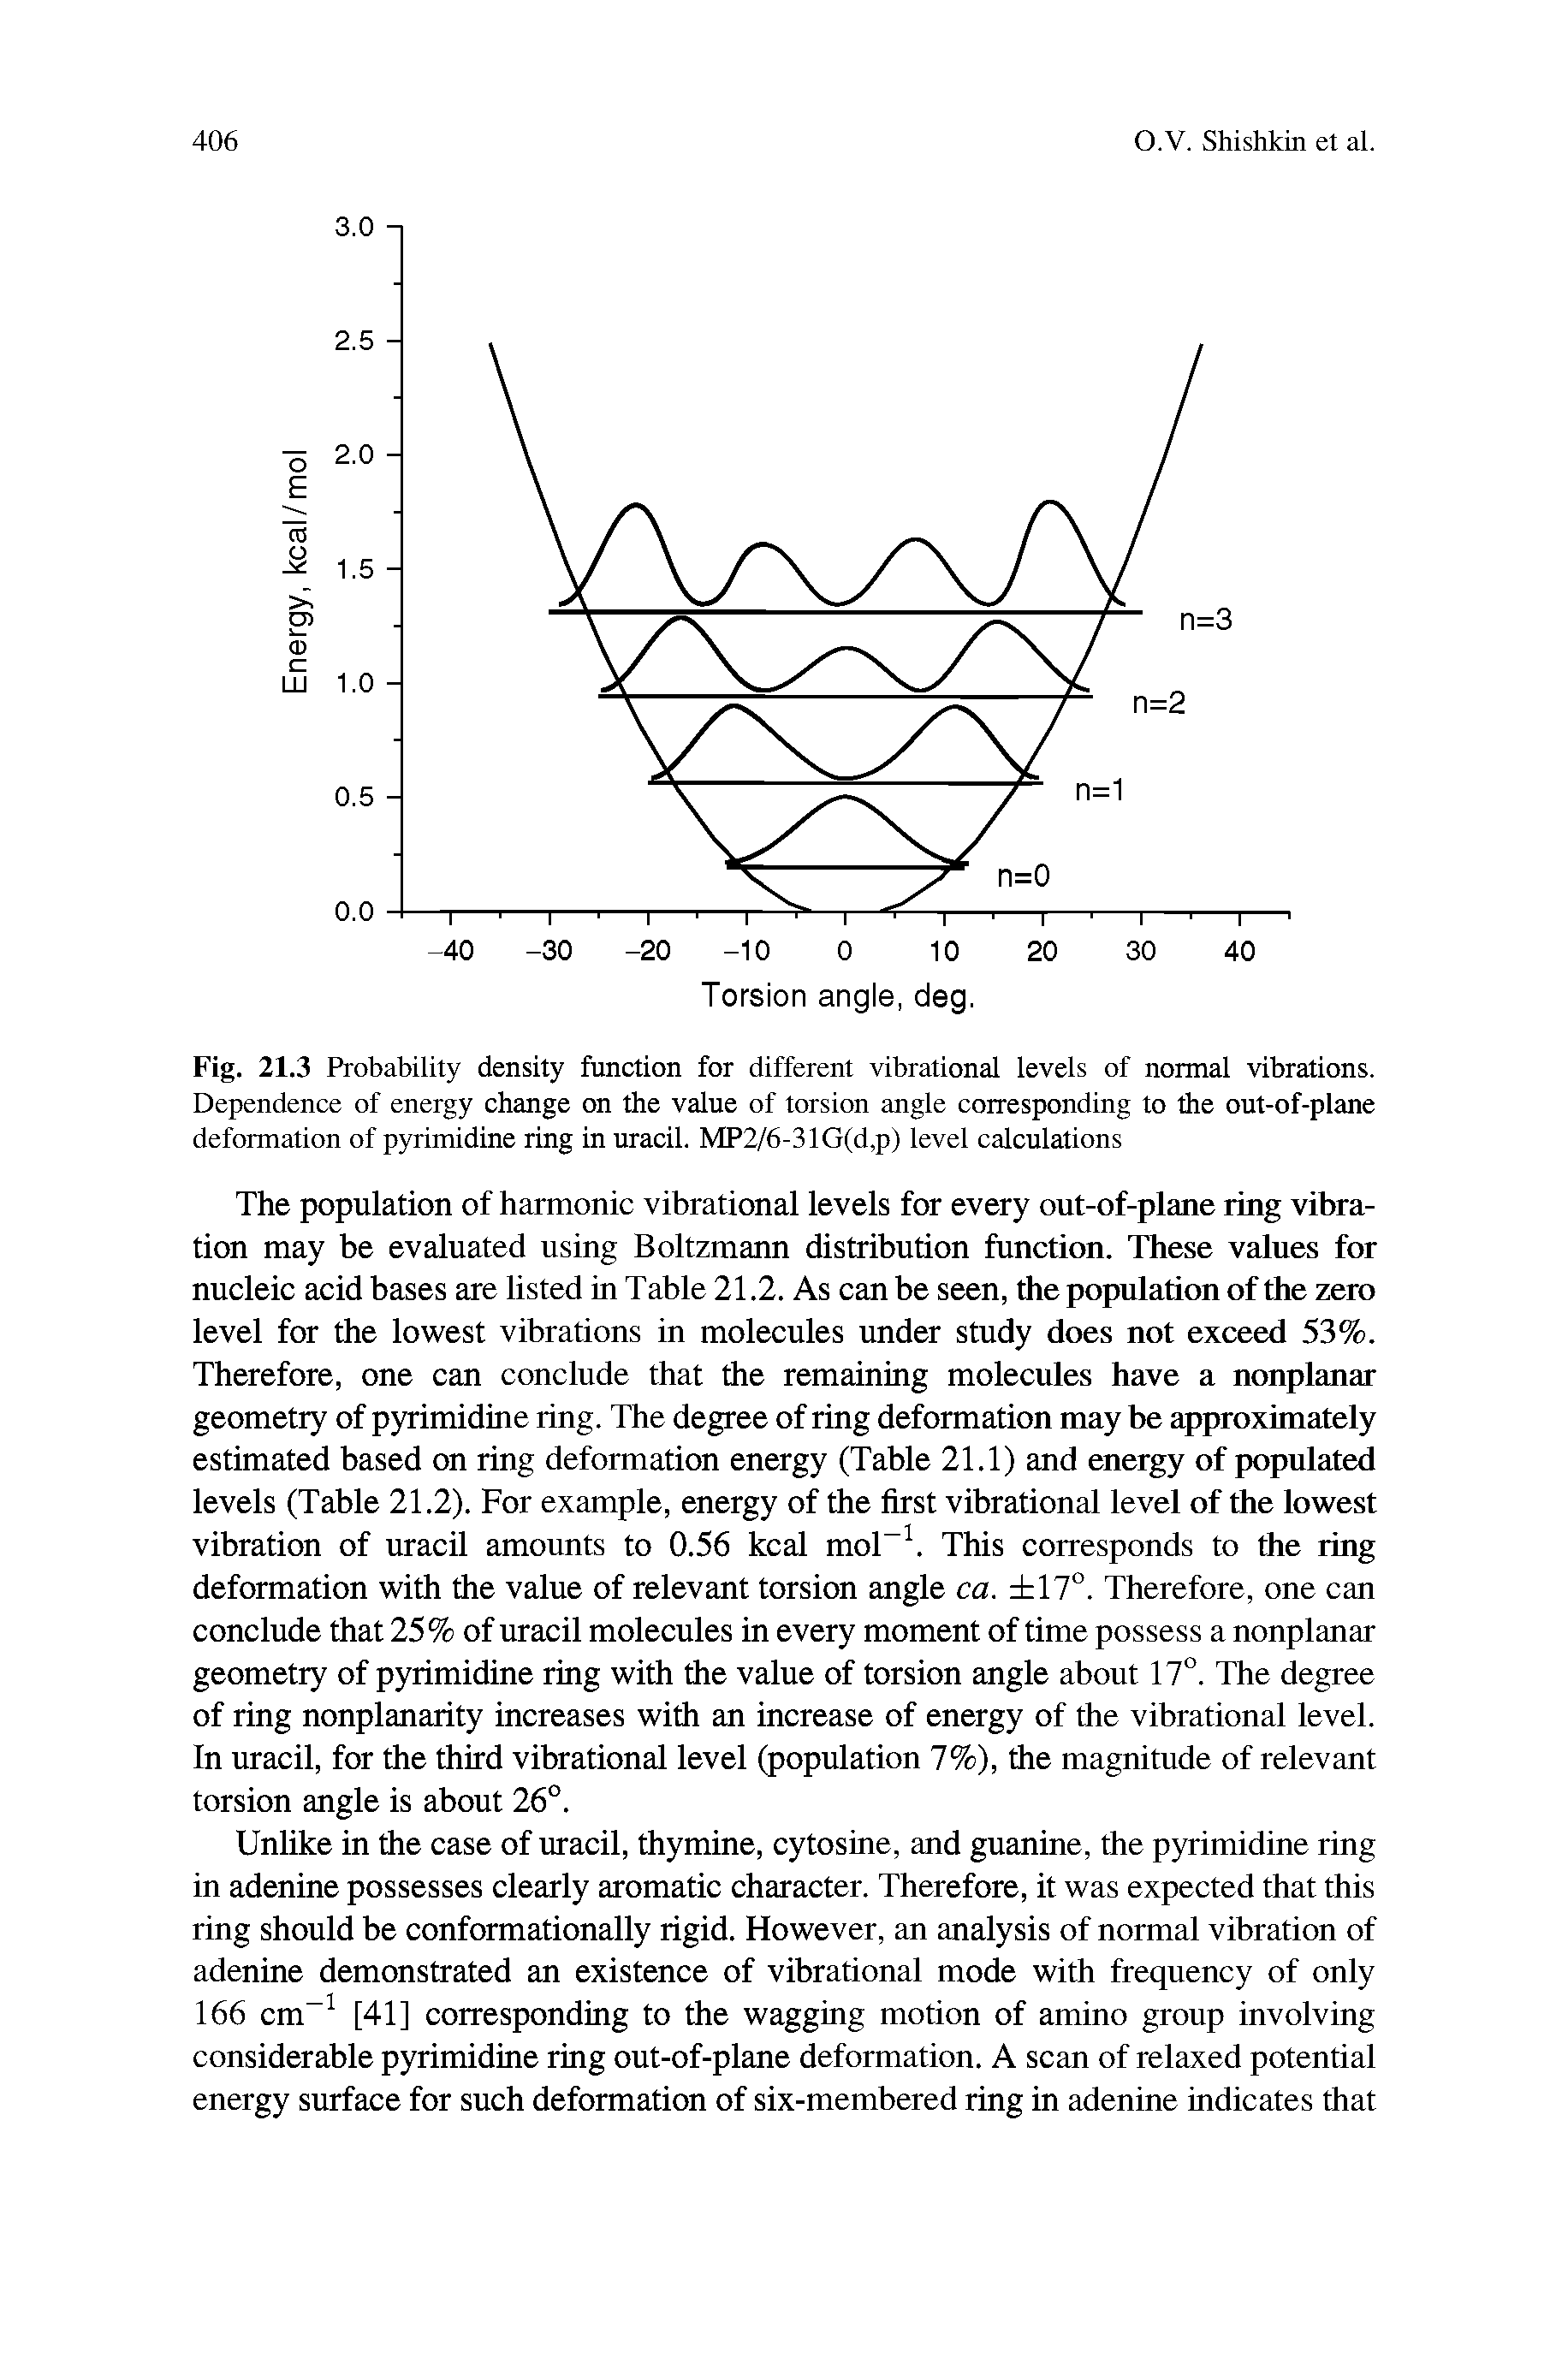 Fig. 21.3 Probability density function for different vibrational levels of normal vibrations. Dependence of energy change on the value of torsion angle corresponding to the out-of-plane deformation of pyrimidine ring in uracil. MP2/6-31G(d,p) level calculations...